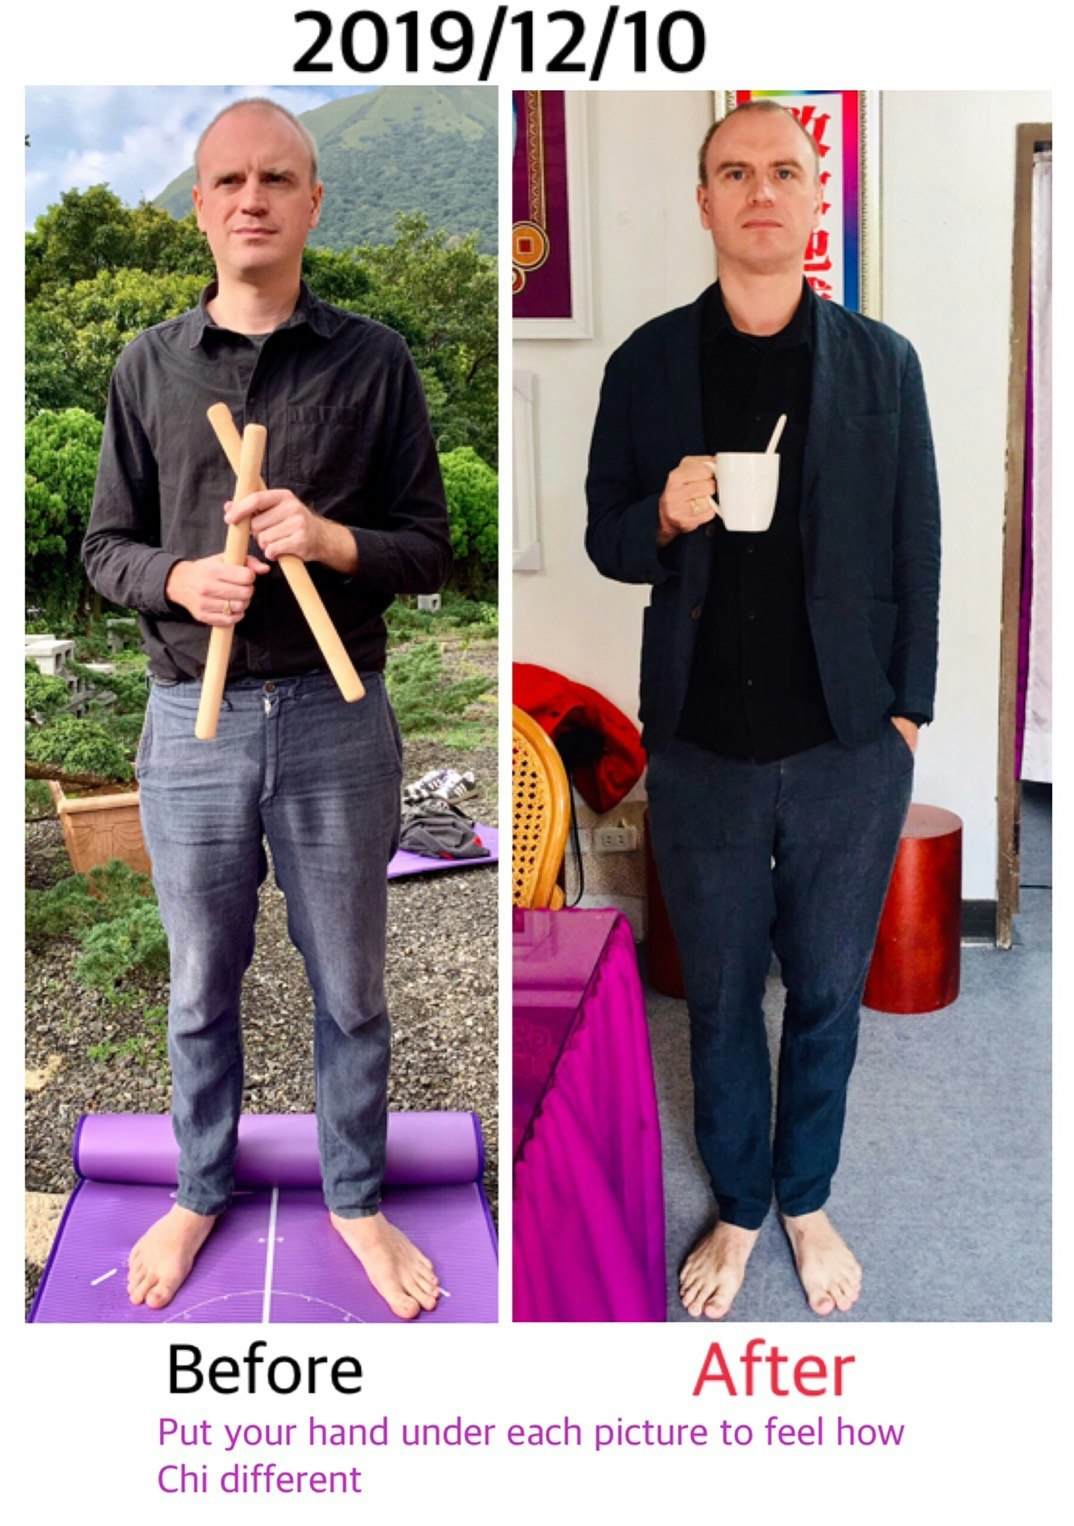 A collage of two images of the author from before and after the massage. Though he's standing against different backgrounds, he looks the same in both.